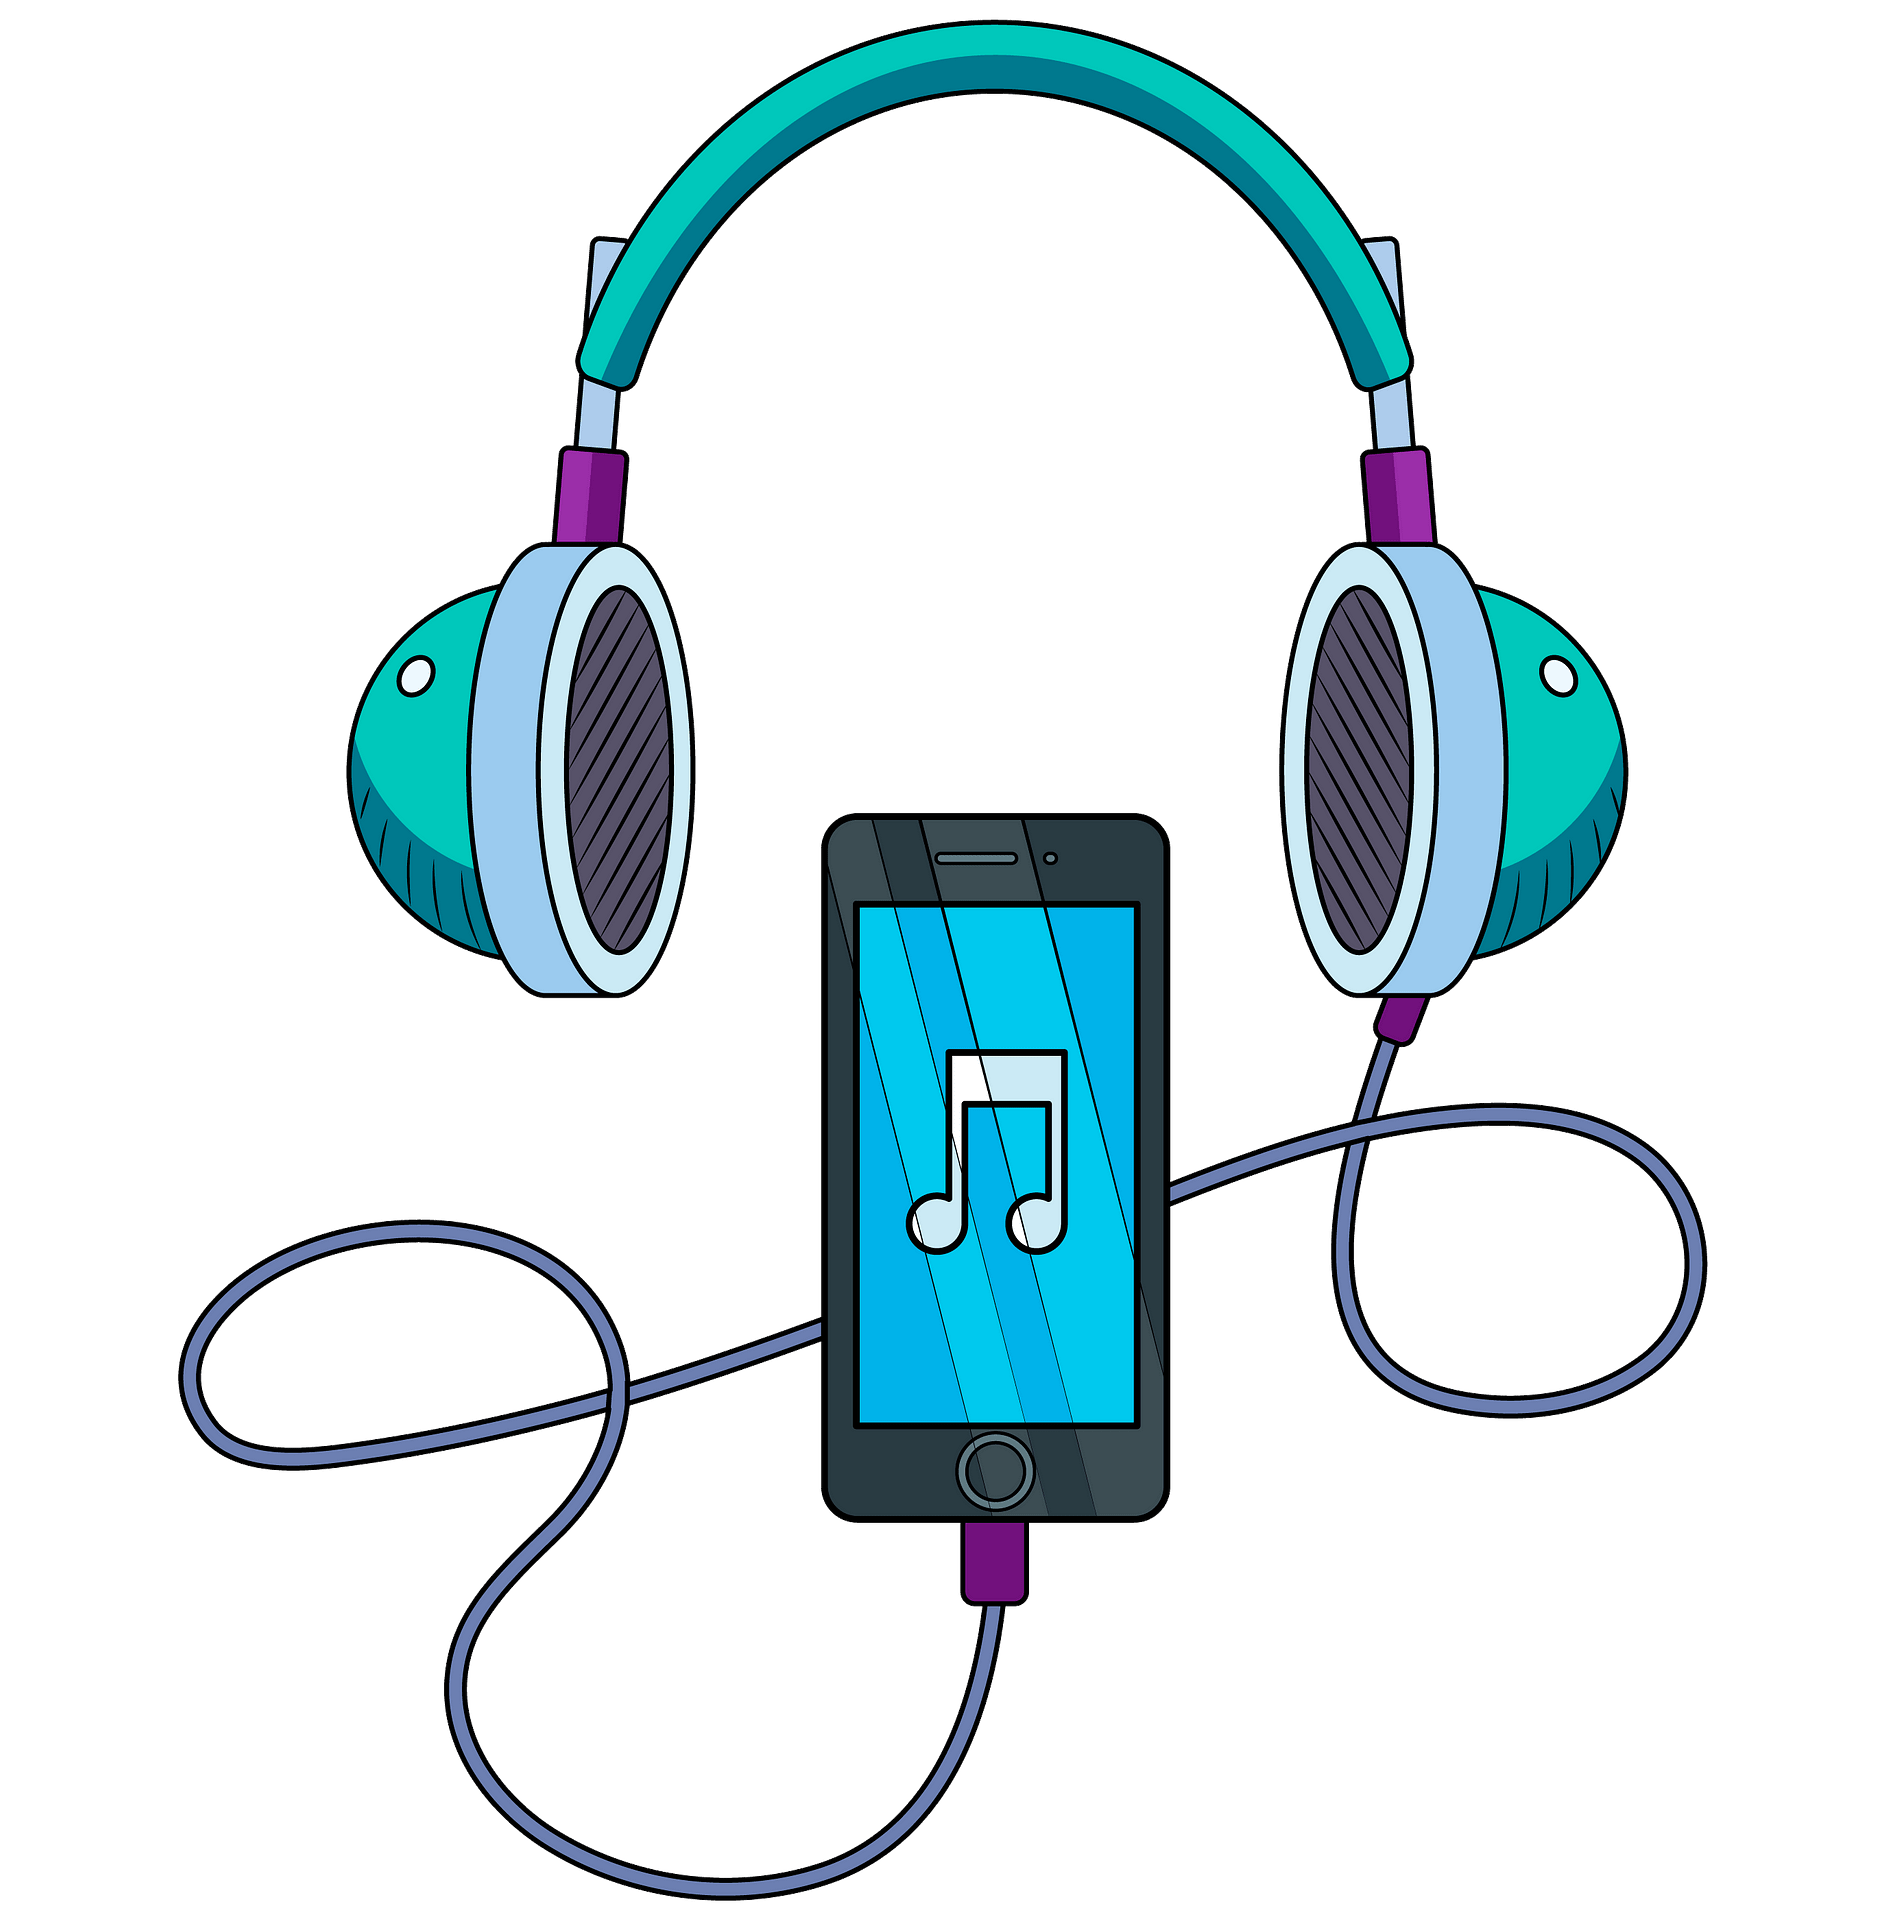 Music player and headphones clipart. Free download..